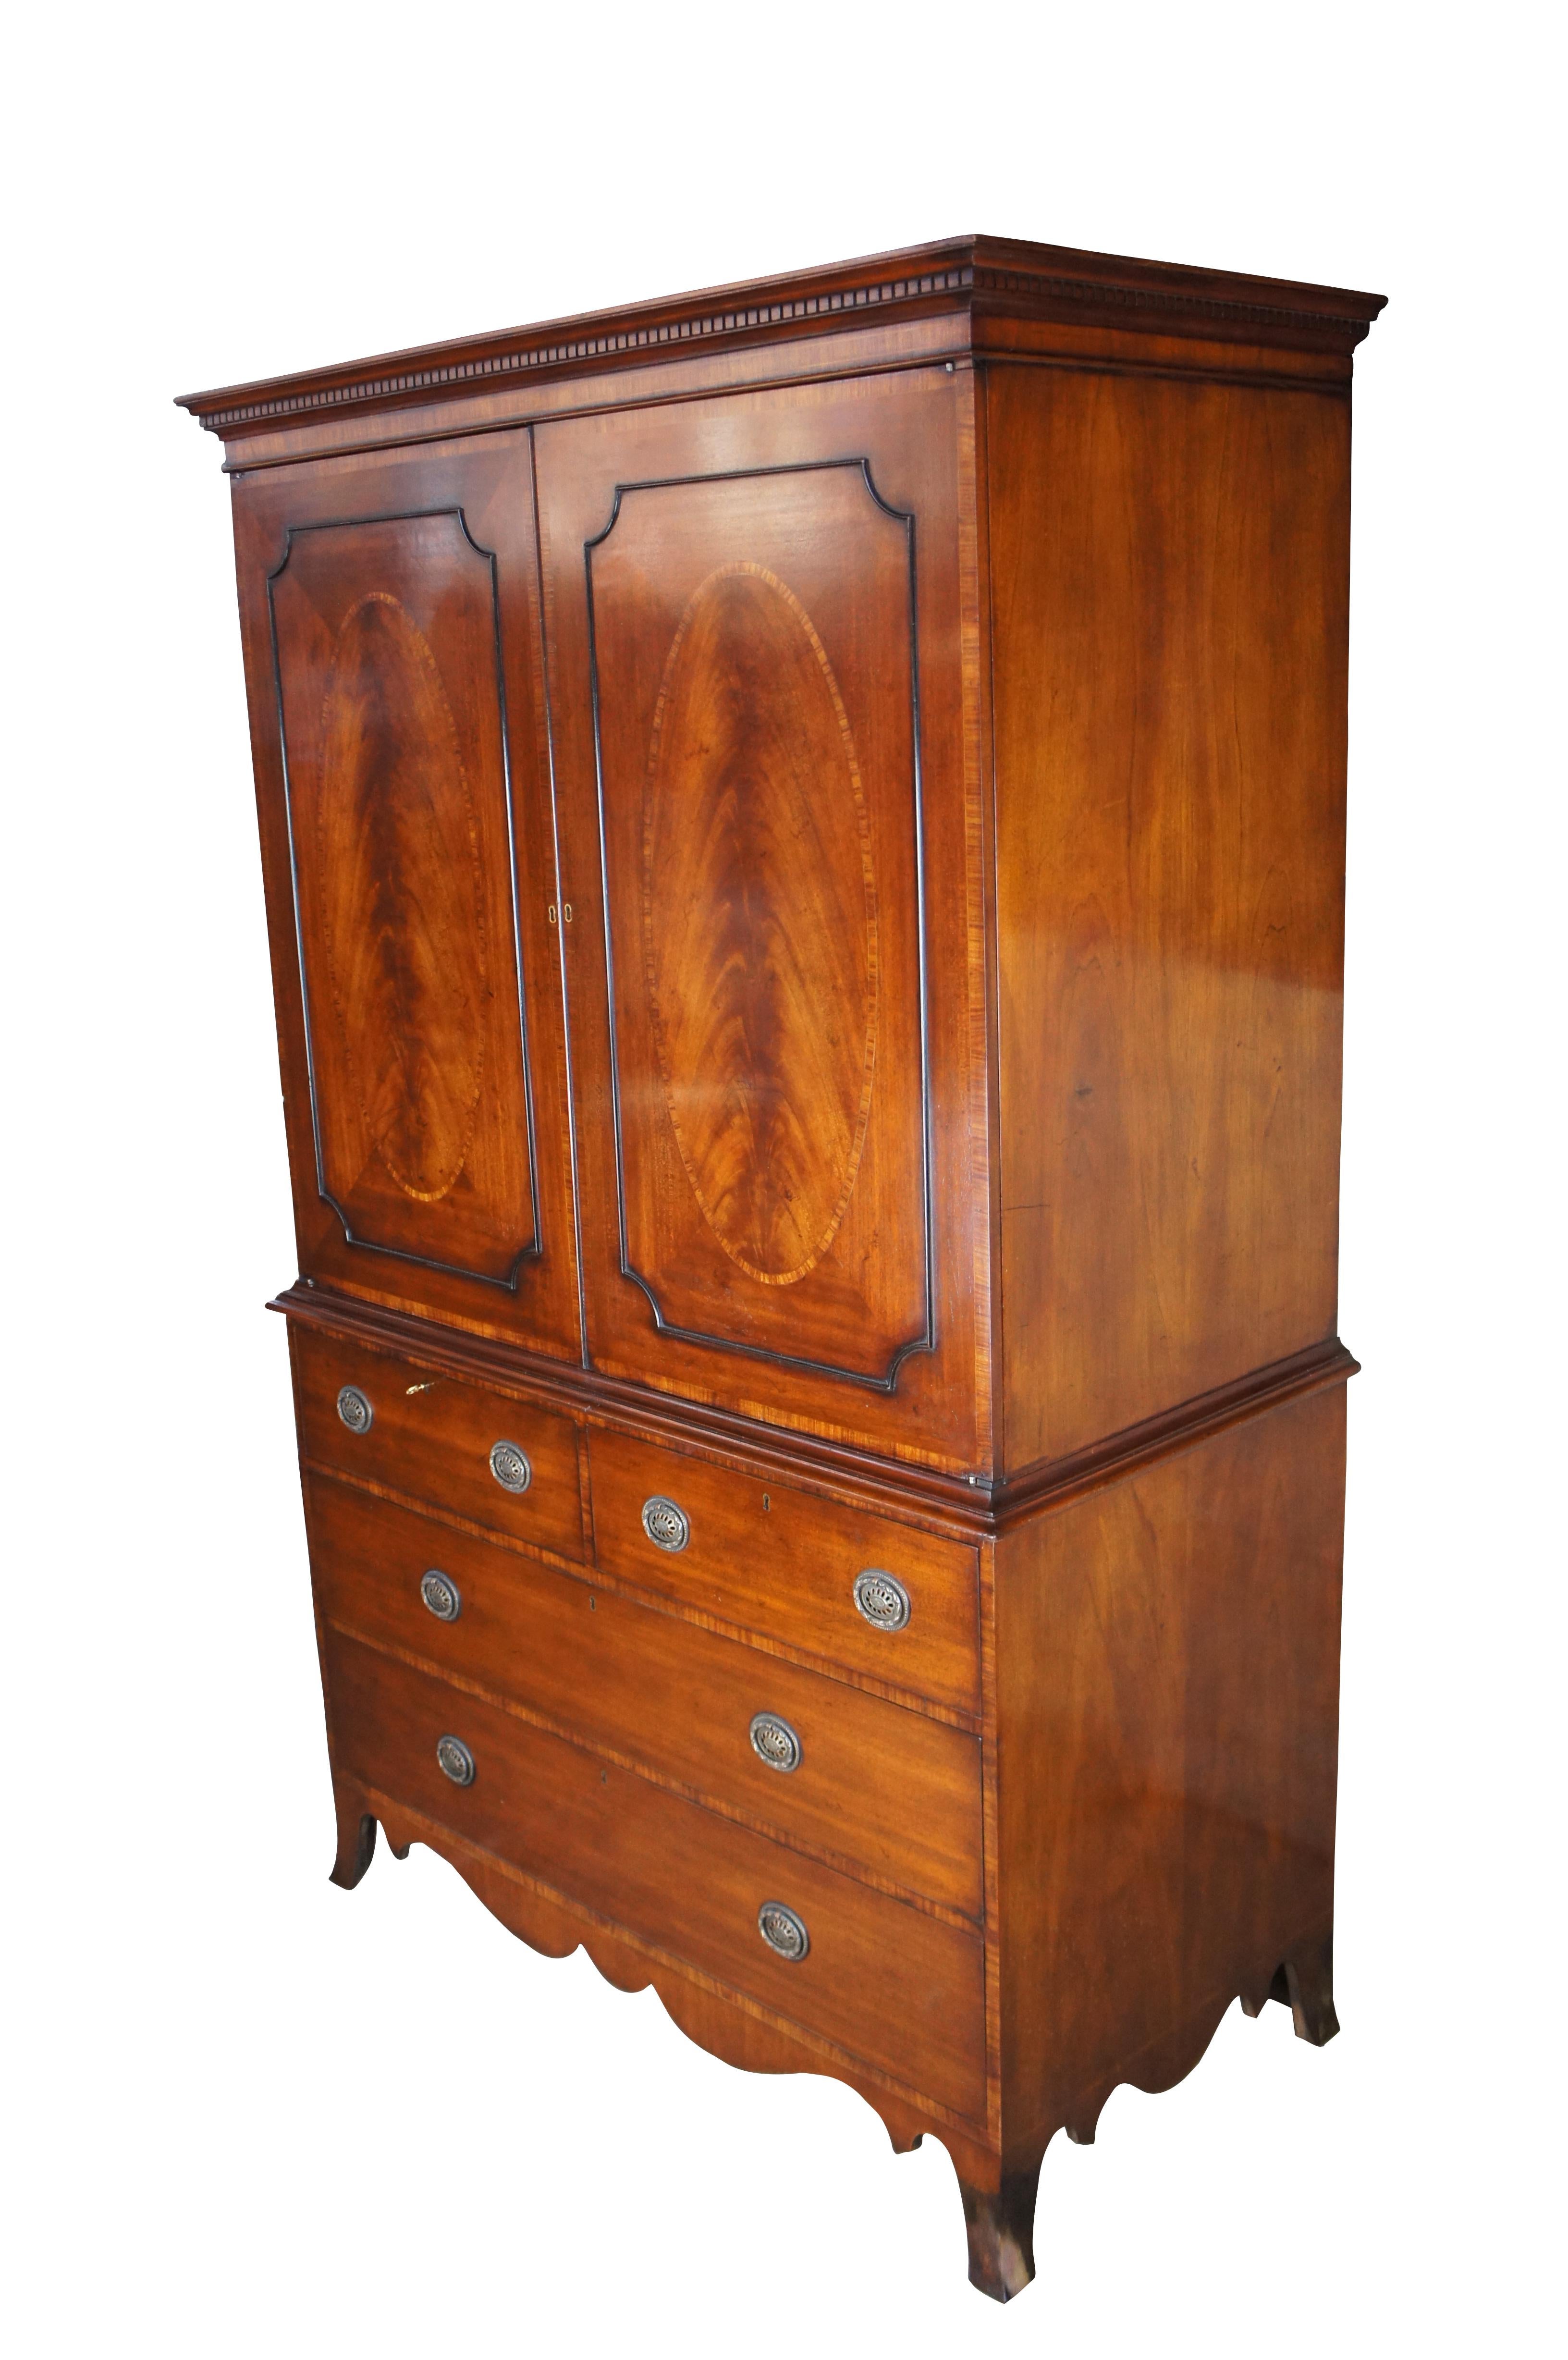 Late 20th Century George III Armoire by the English Cabinetmaker Arthur Brett. A two piece case made from mahogany with panels of crotch mahogany, cross banding and inlay. The upper portion showcases beautiful flame mahogany doors, oval